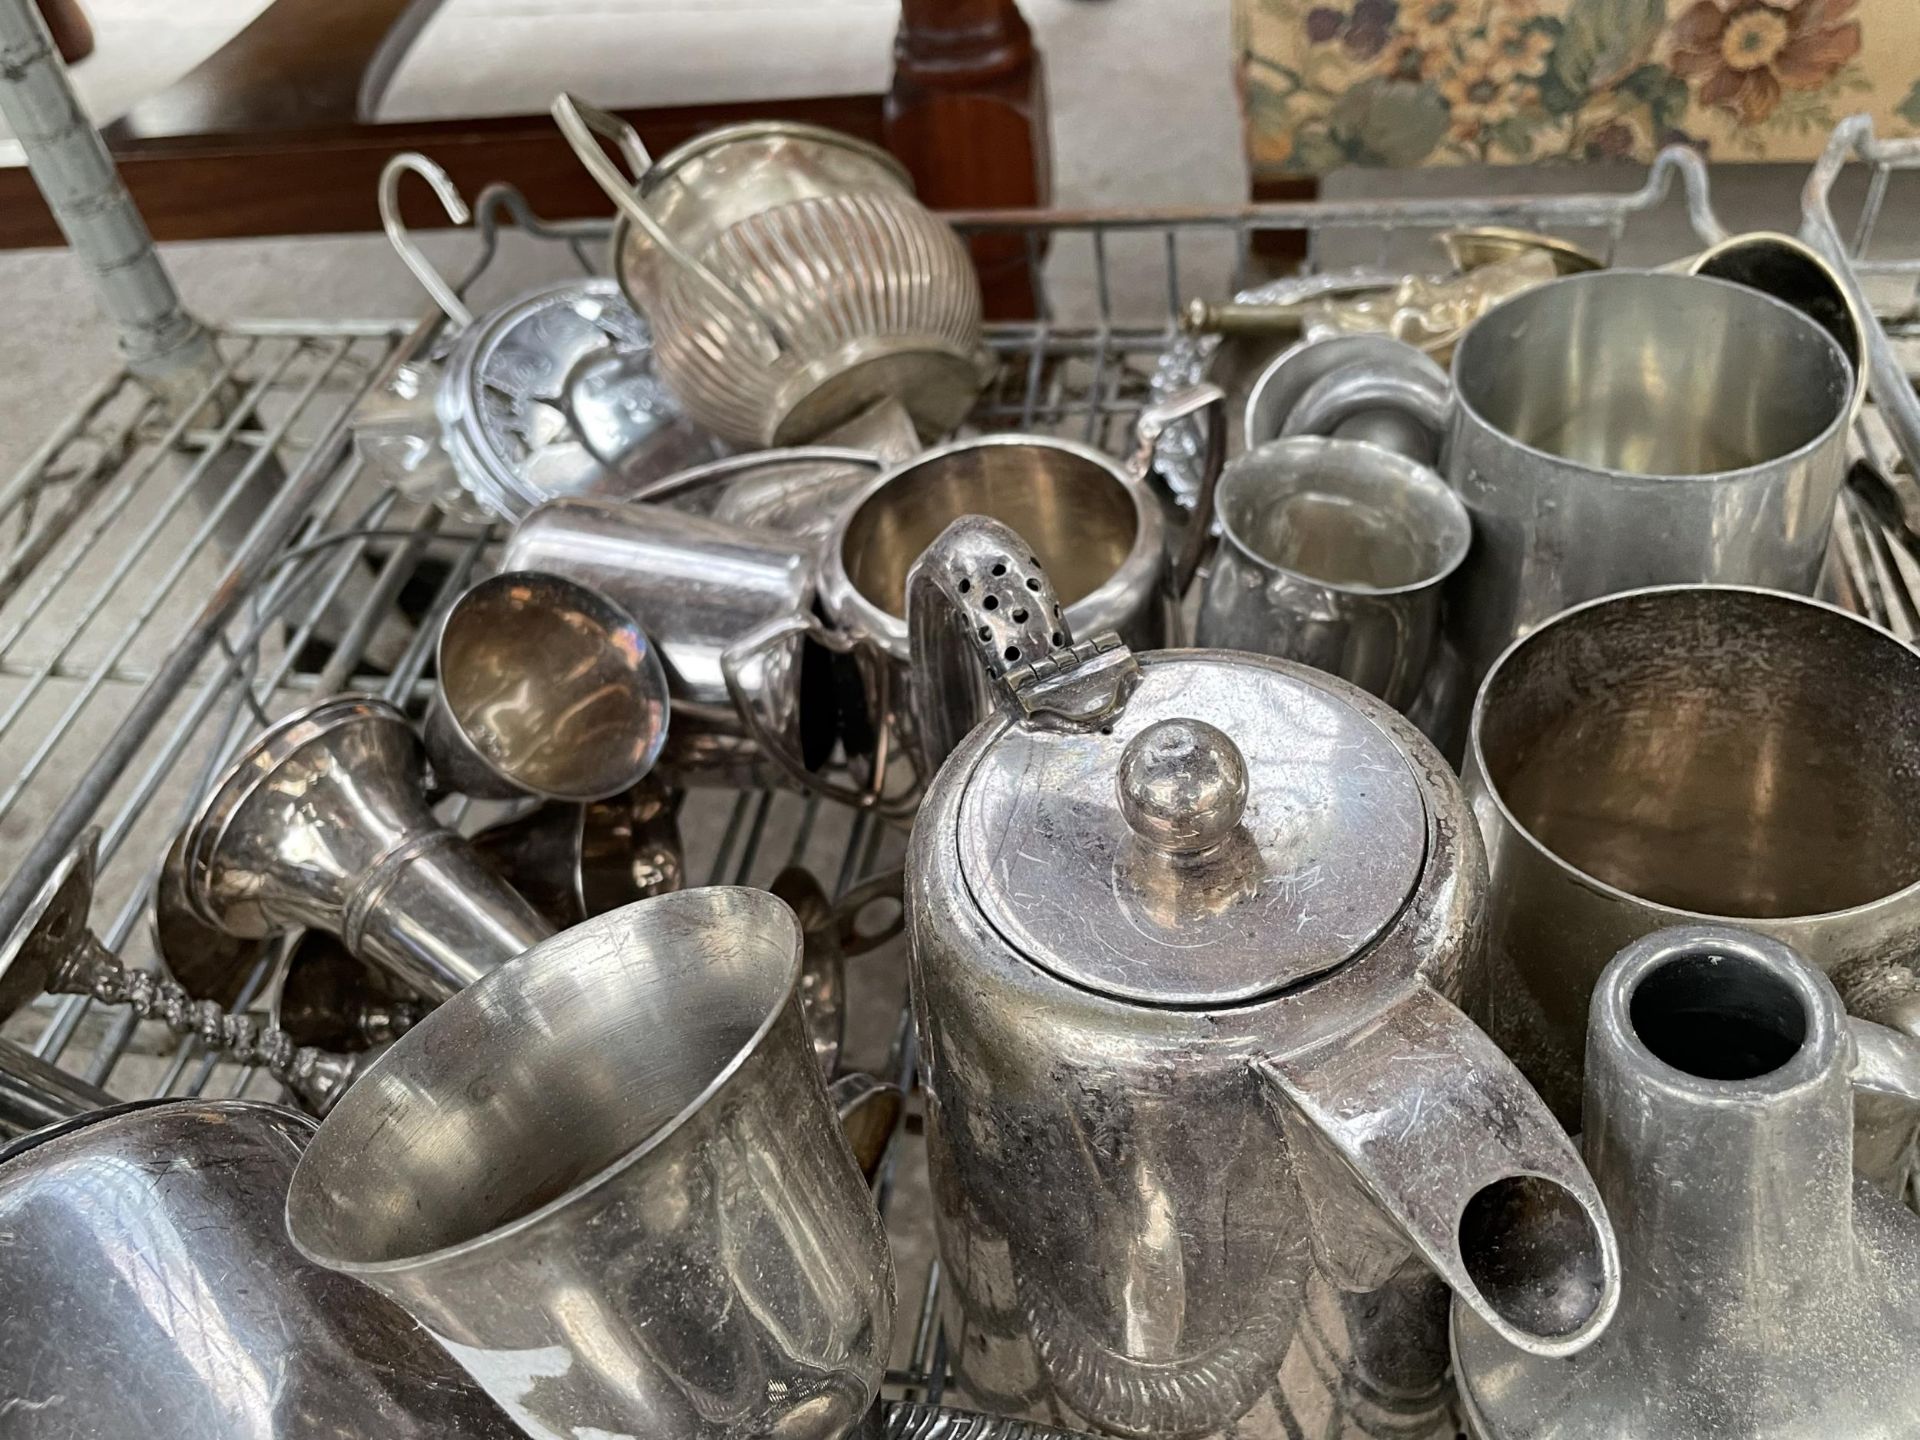 AN ASSORTMENT OF SILVER PLATE ITEMS TO INCLUDE TEAPOTS, CANDLESTICKS AND GOBLETS ETC - Image 2 of 2